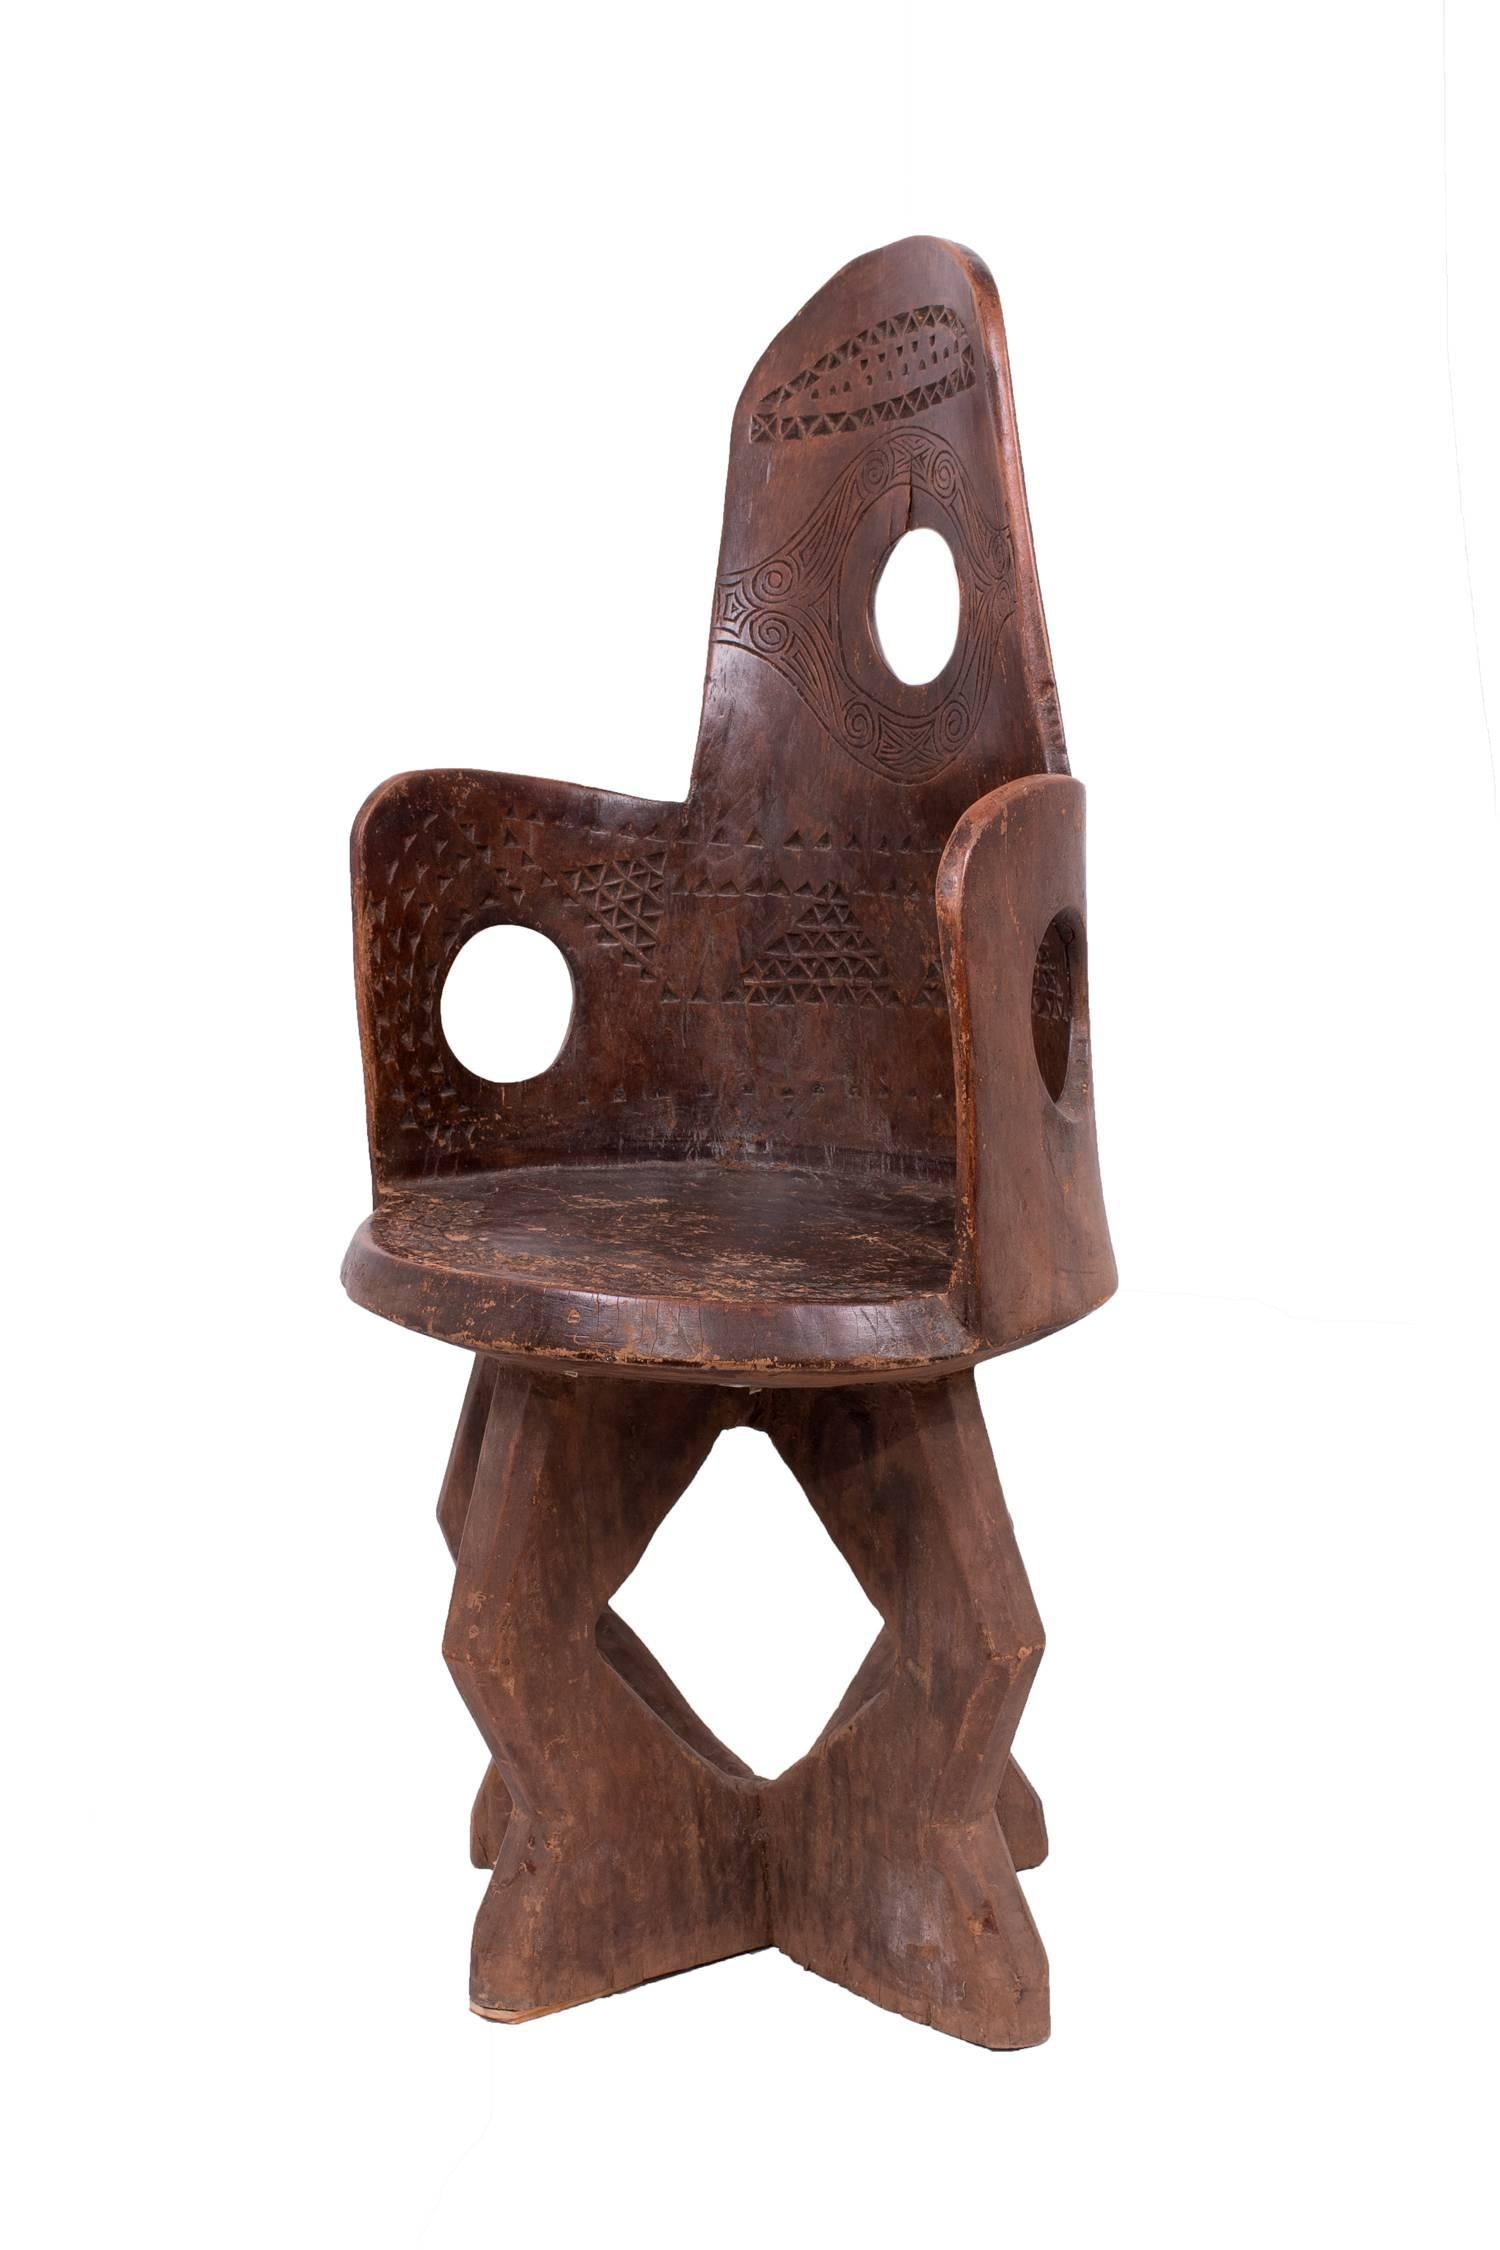 Carved from a single piece of dense, heavy wood with wonderful motifs.